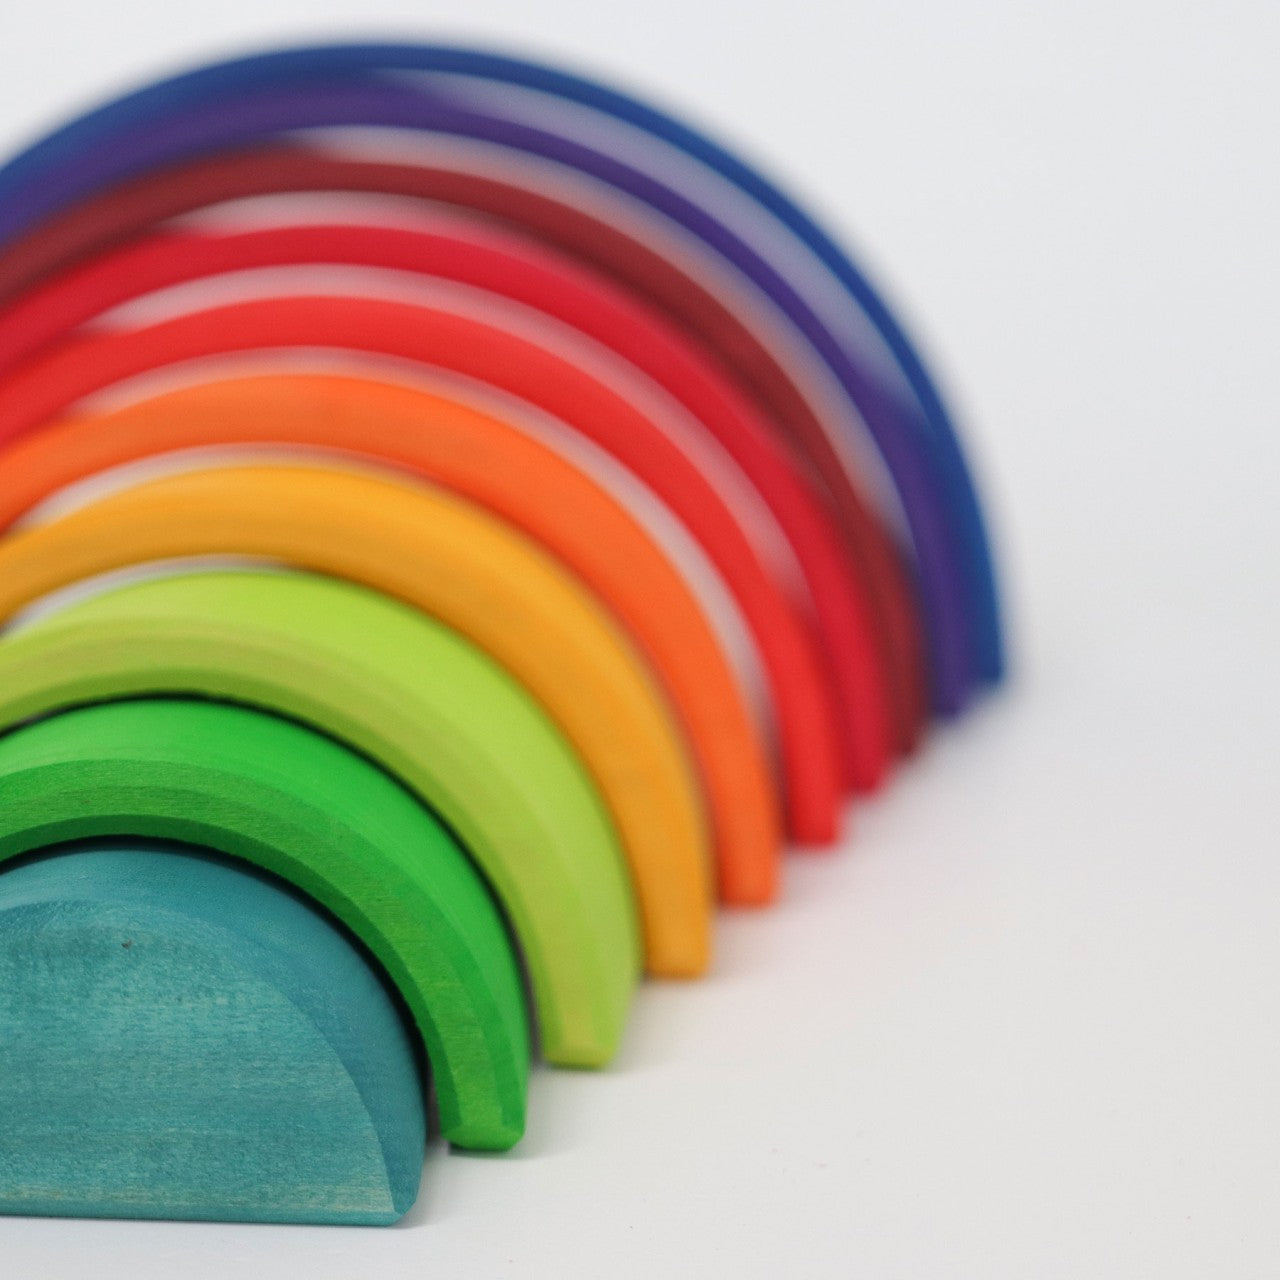 A new wooden stacking rainbow from the magical world of Grimm's: the 10-piece counting rainbow is a wonderful addition for open-ended play.